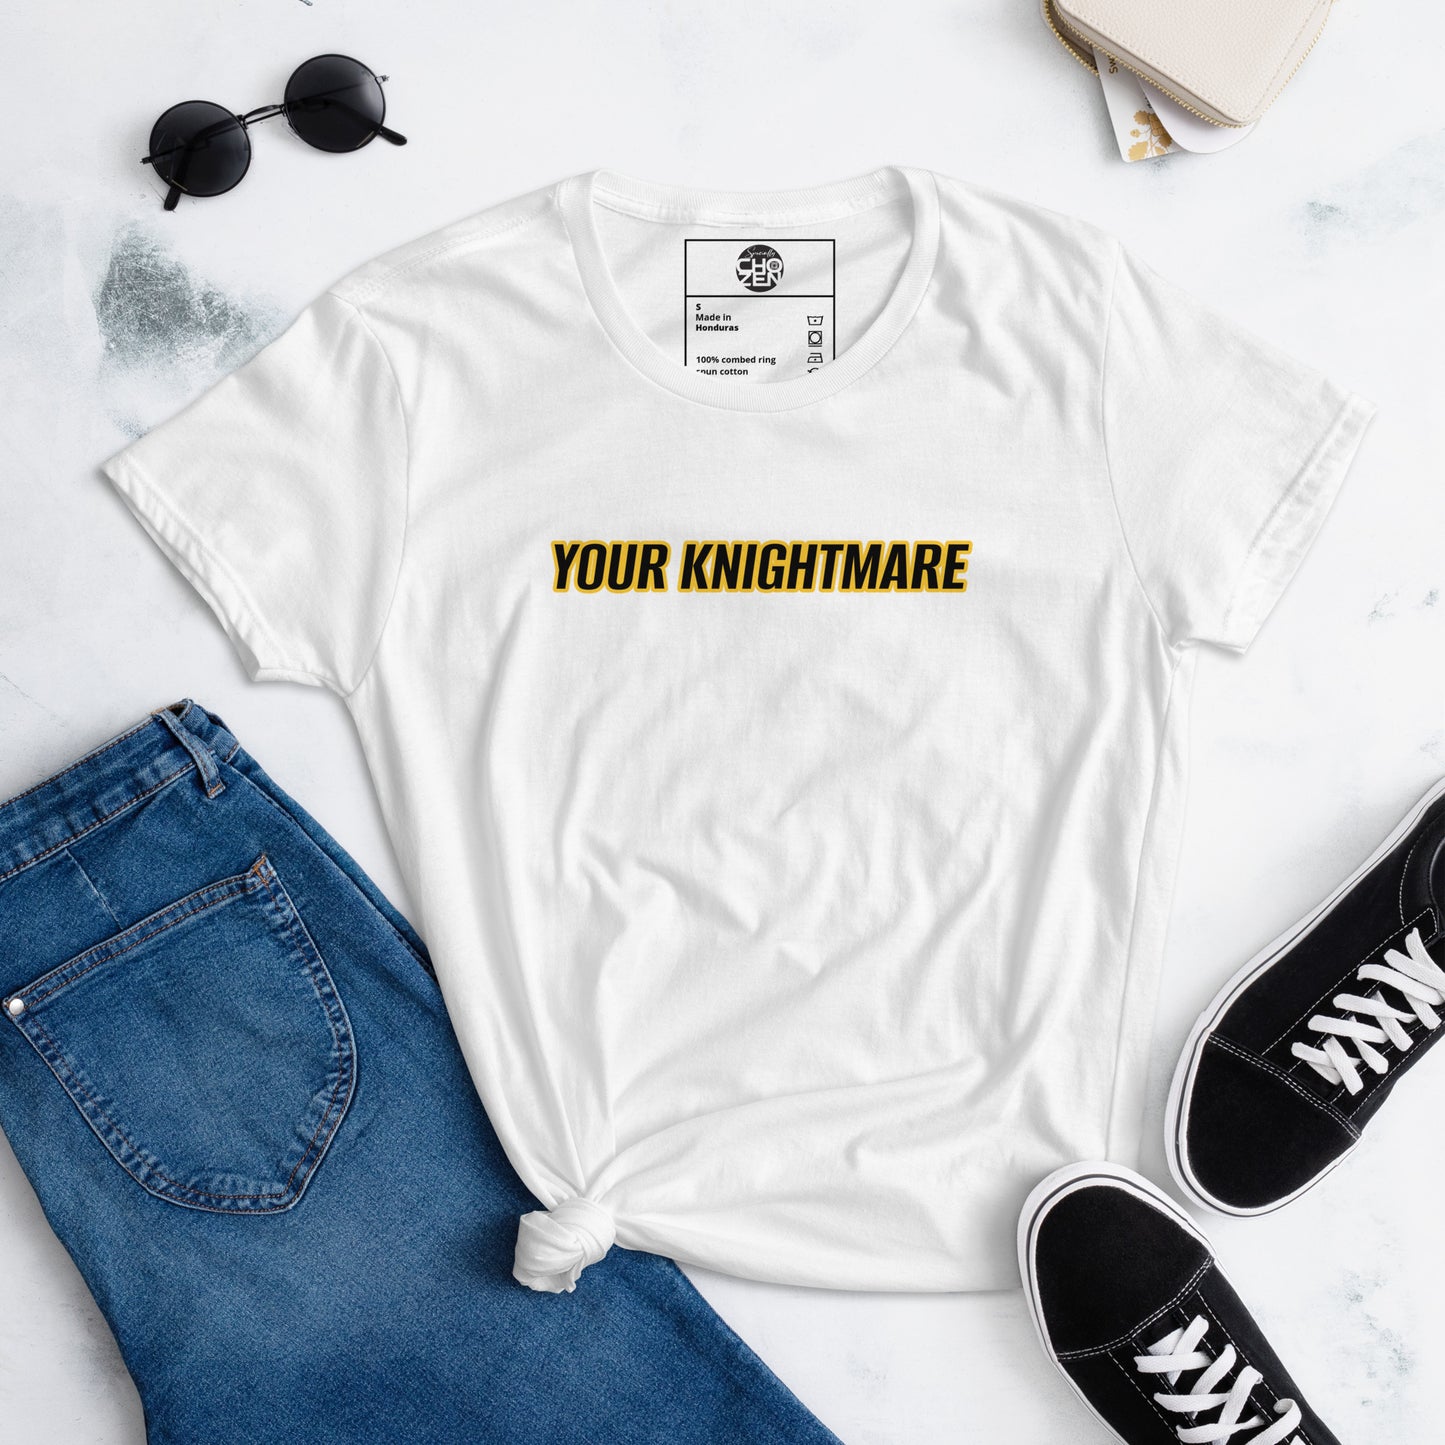 YOUR KNIGHTMARE | short sleeve t-shirt